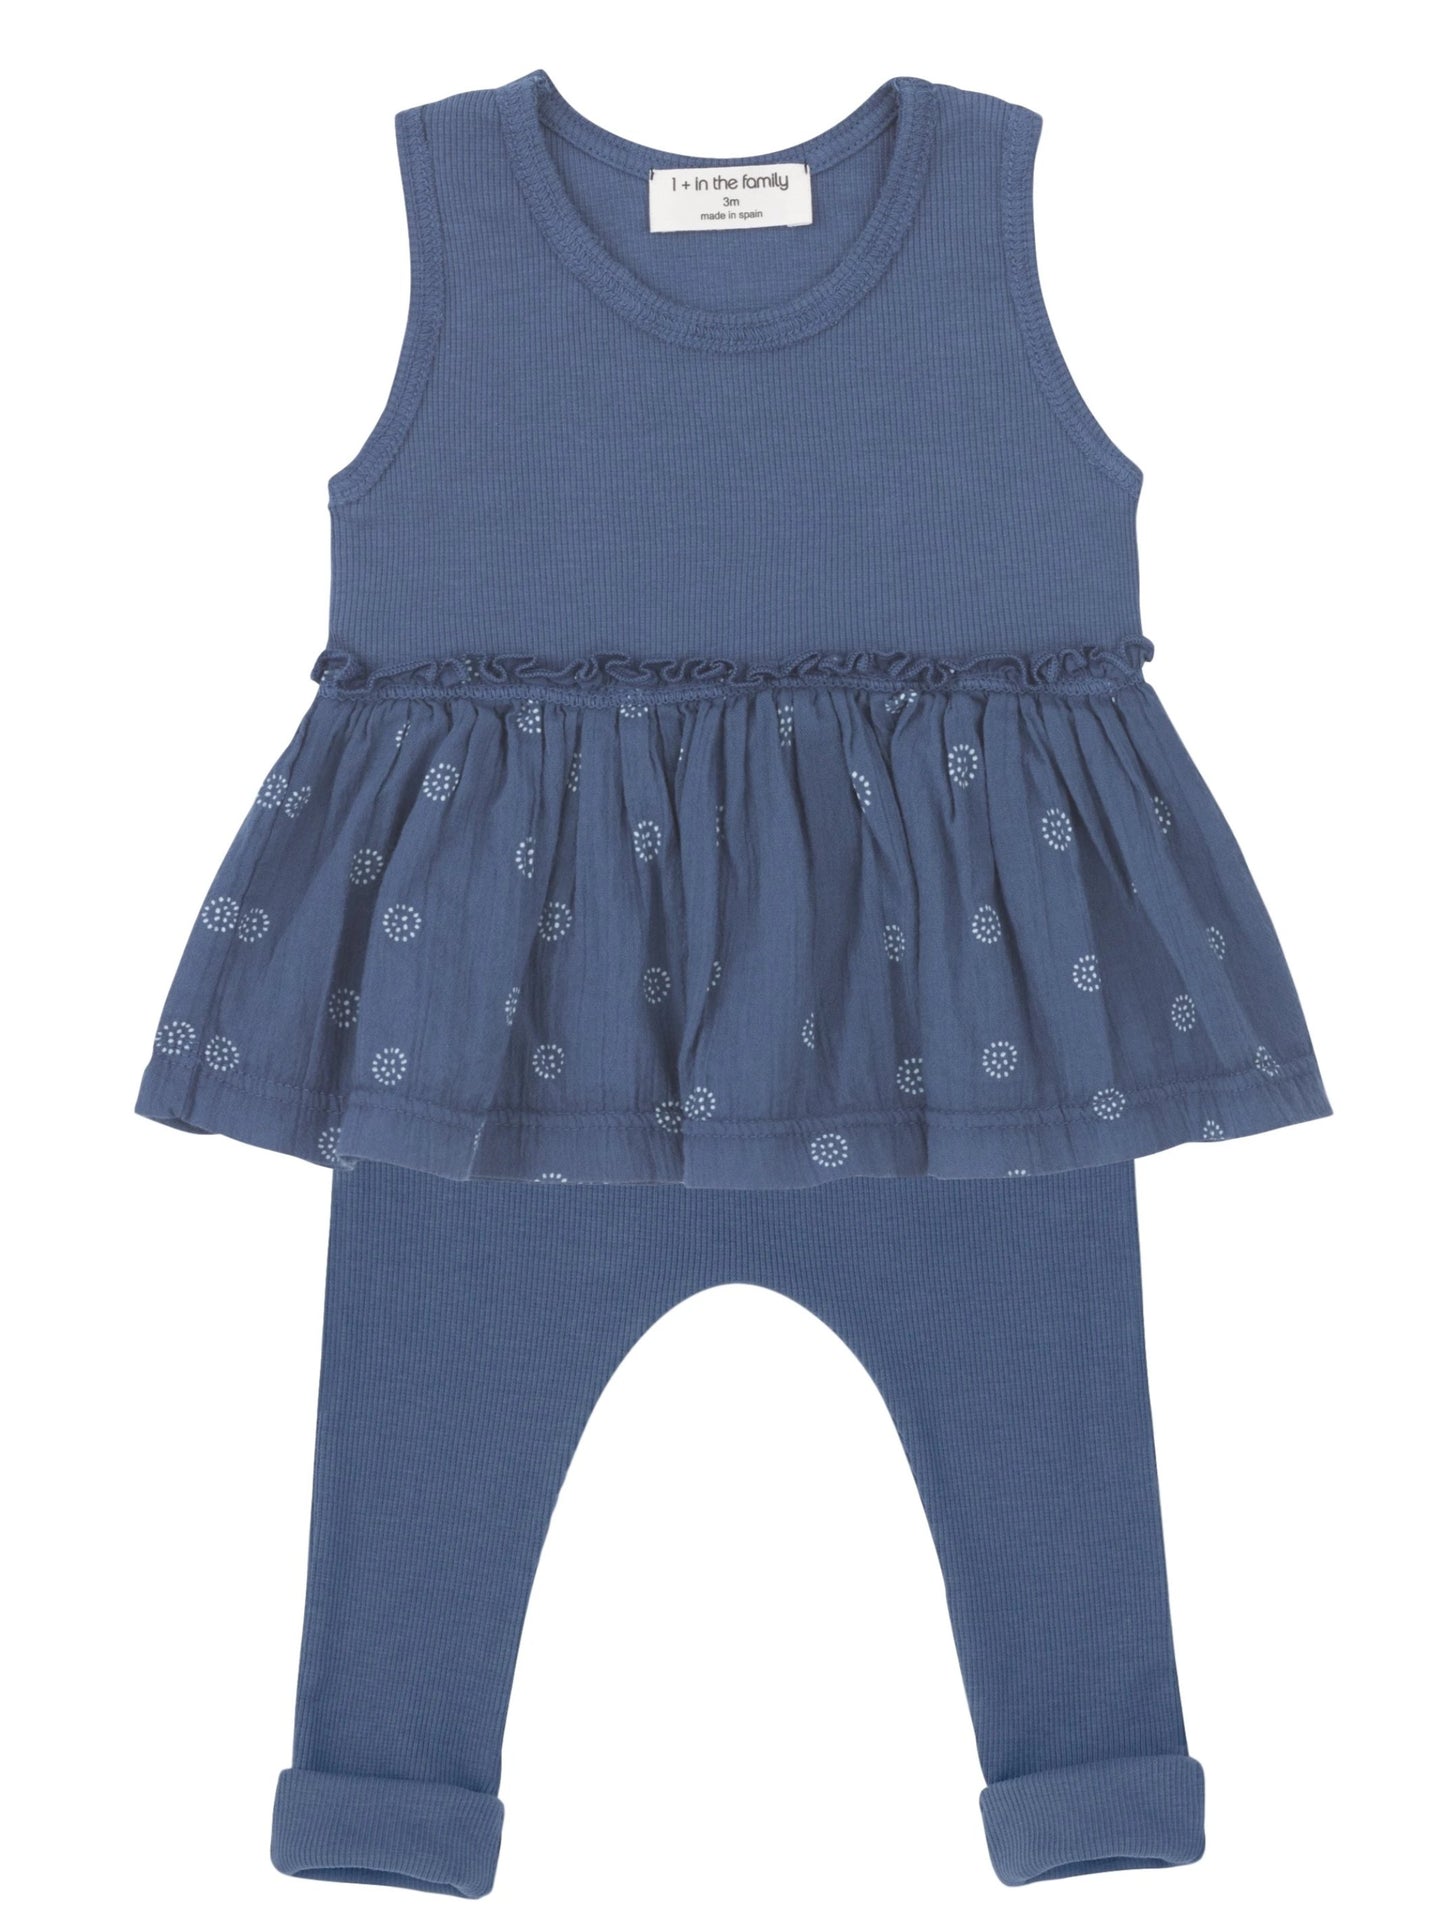 One + In the Family Baby Girl Barletta & Marti Outfit Set